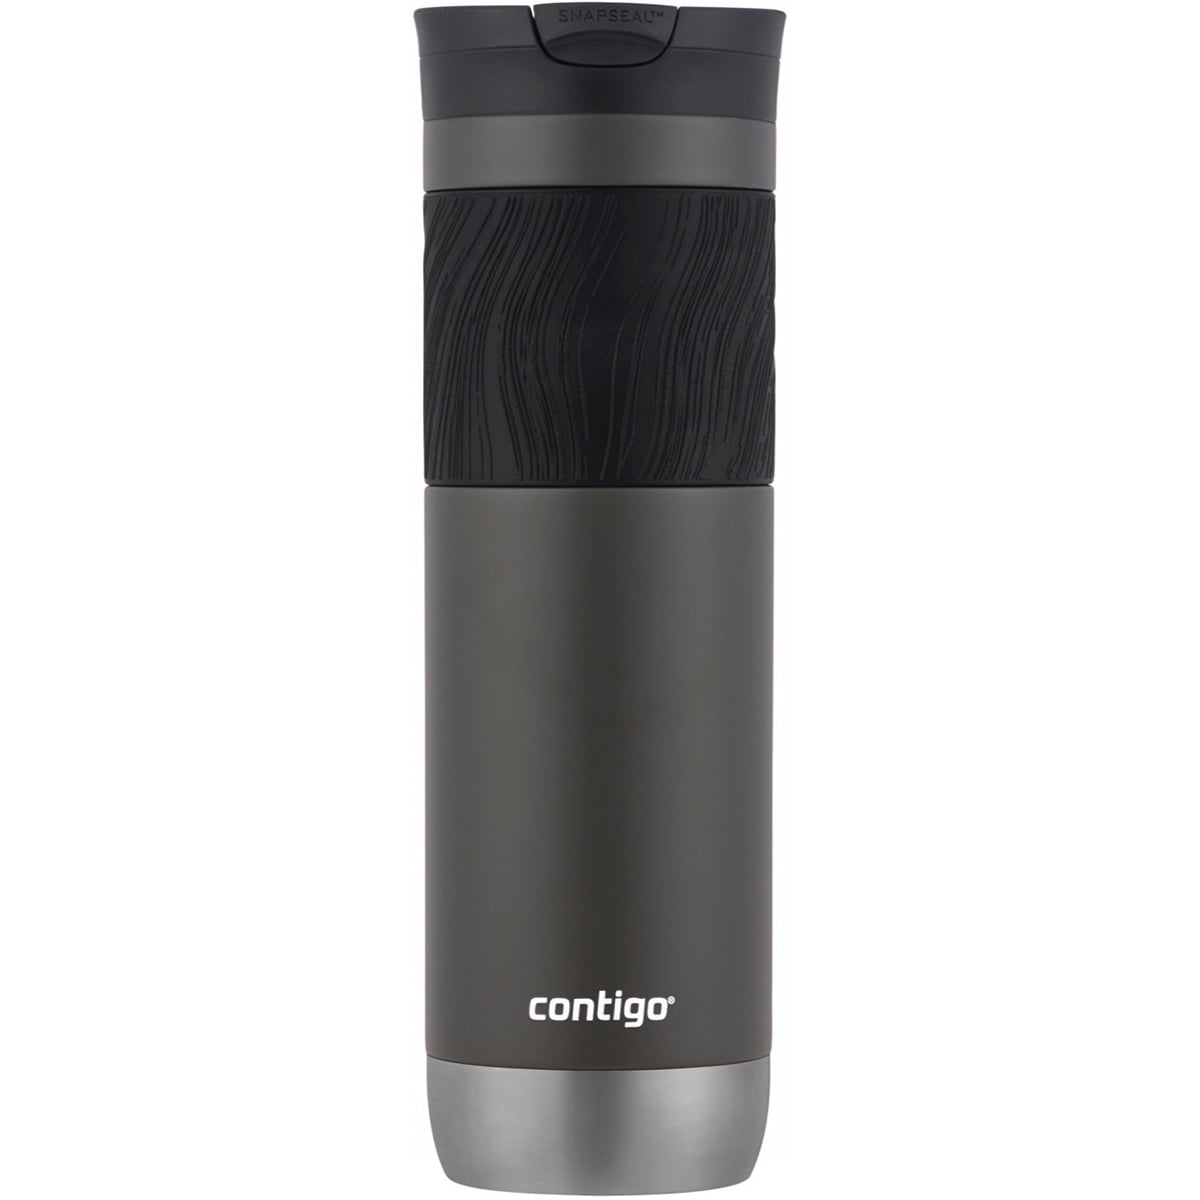 Byron 2.0 Stainless Steel Travel Mug with SNAPSEAL™ Lid and Grip